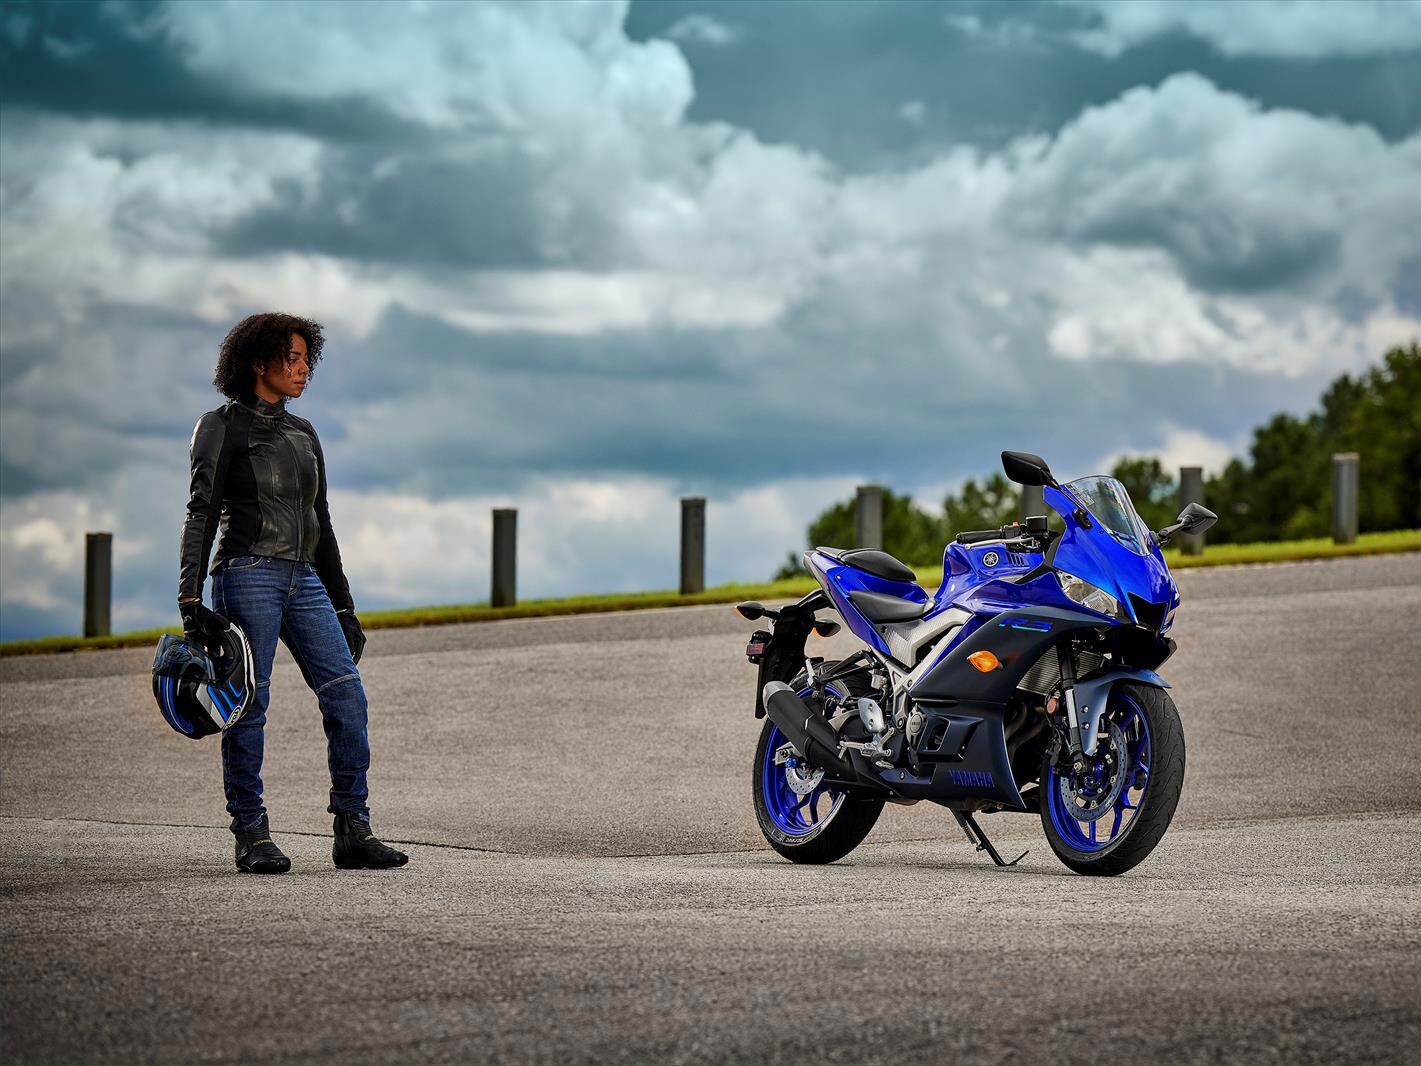 The YZF-R3 was bred for the track.